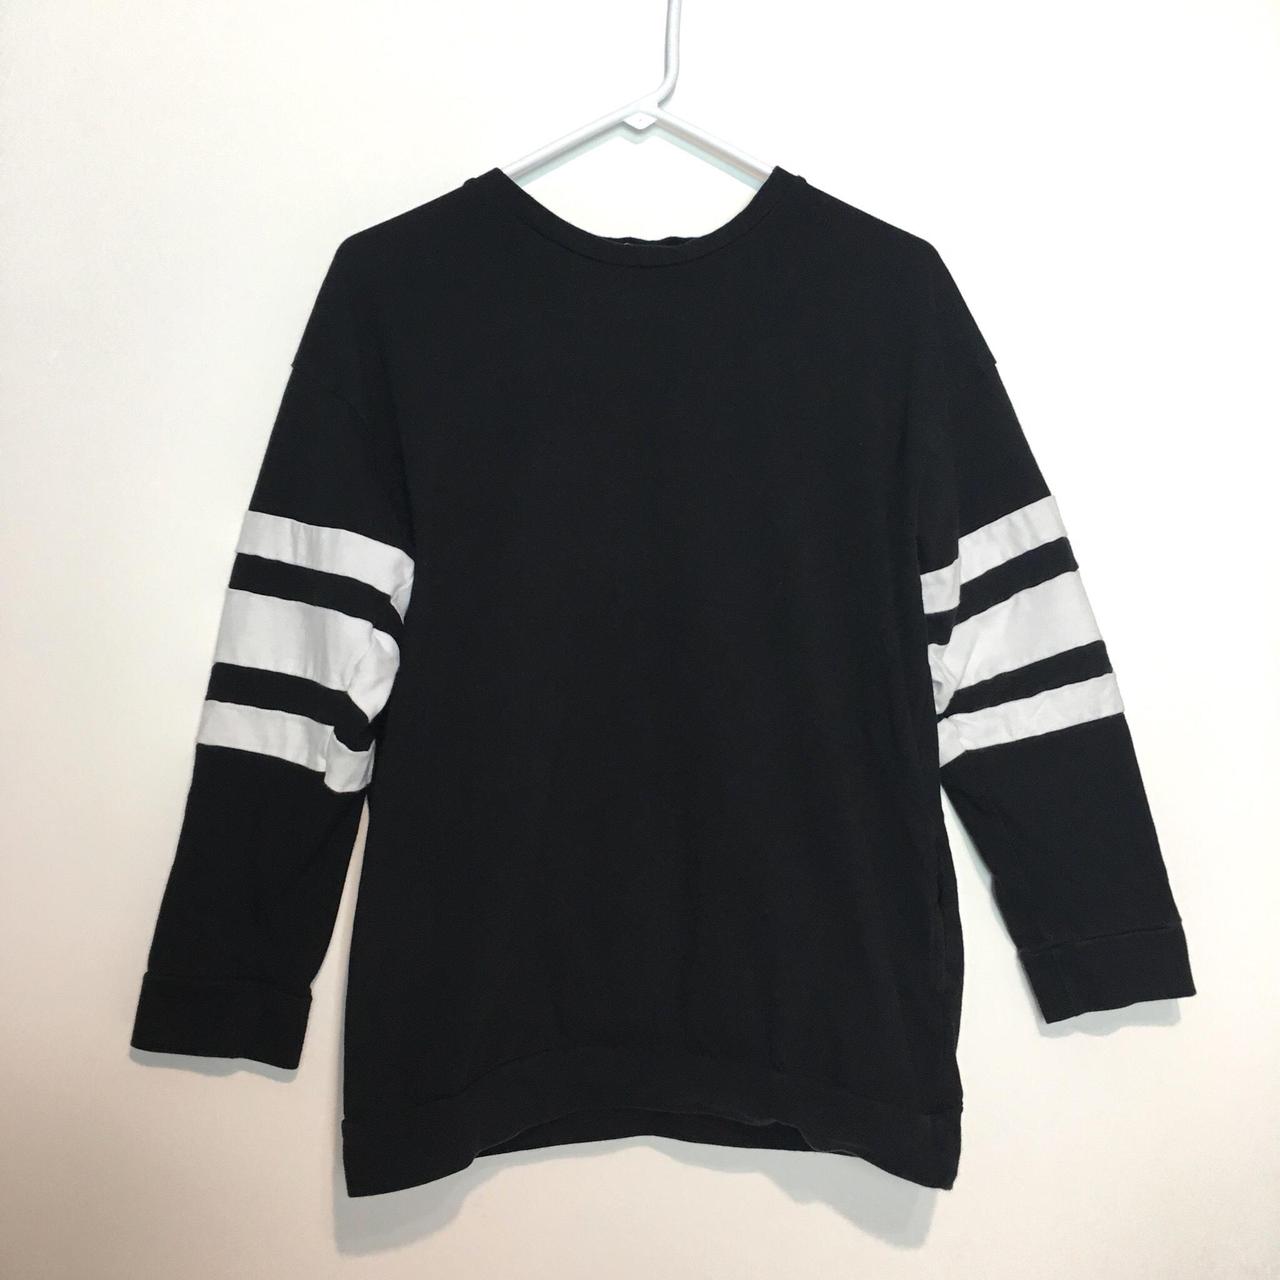 Product Image 1 - black sweat shirt 

this is